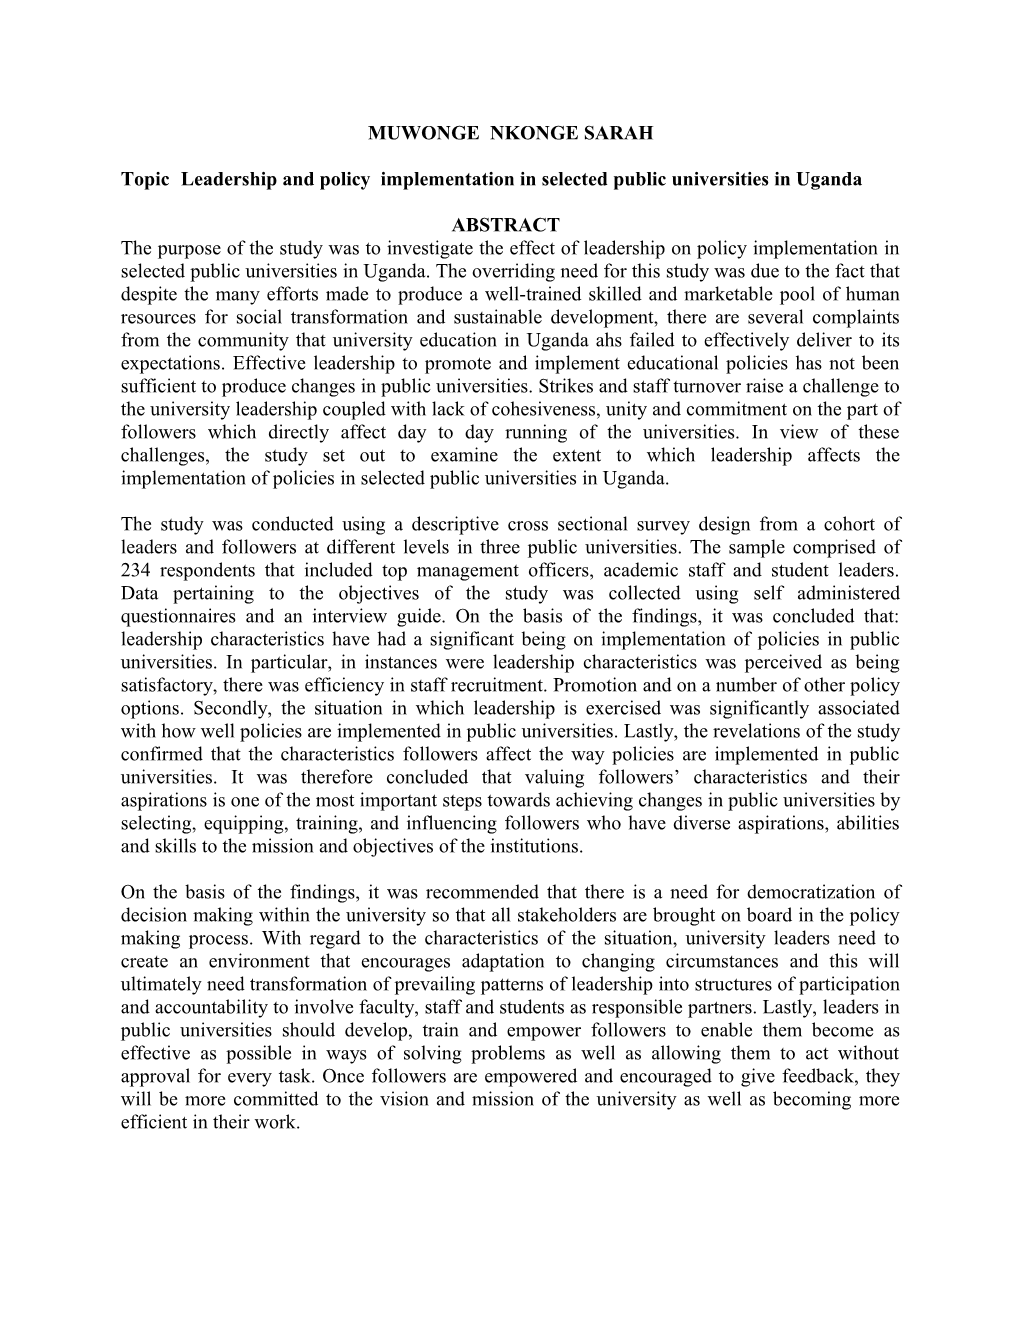 Topic Leadership and Policy Implementation in Selected Public Universities in Uganda